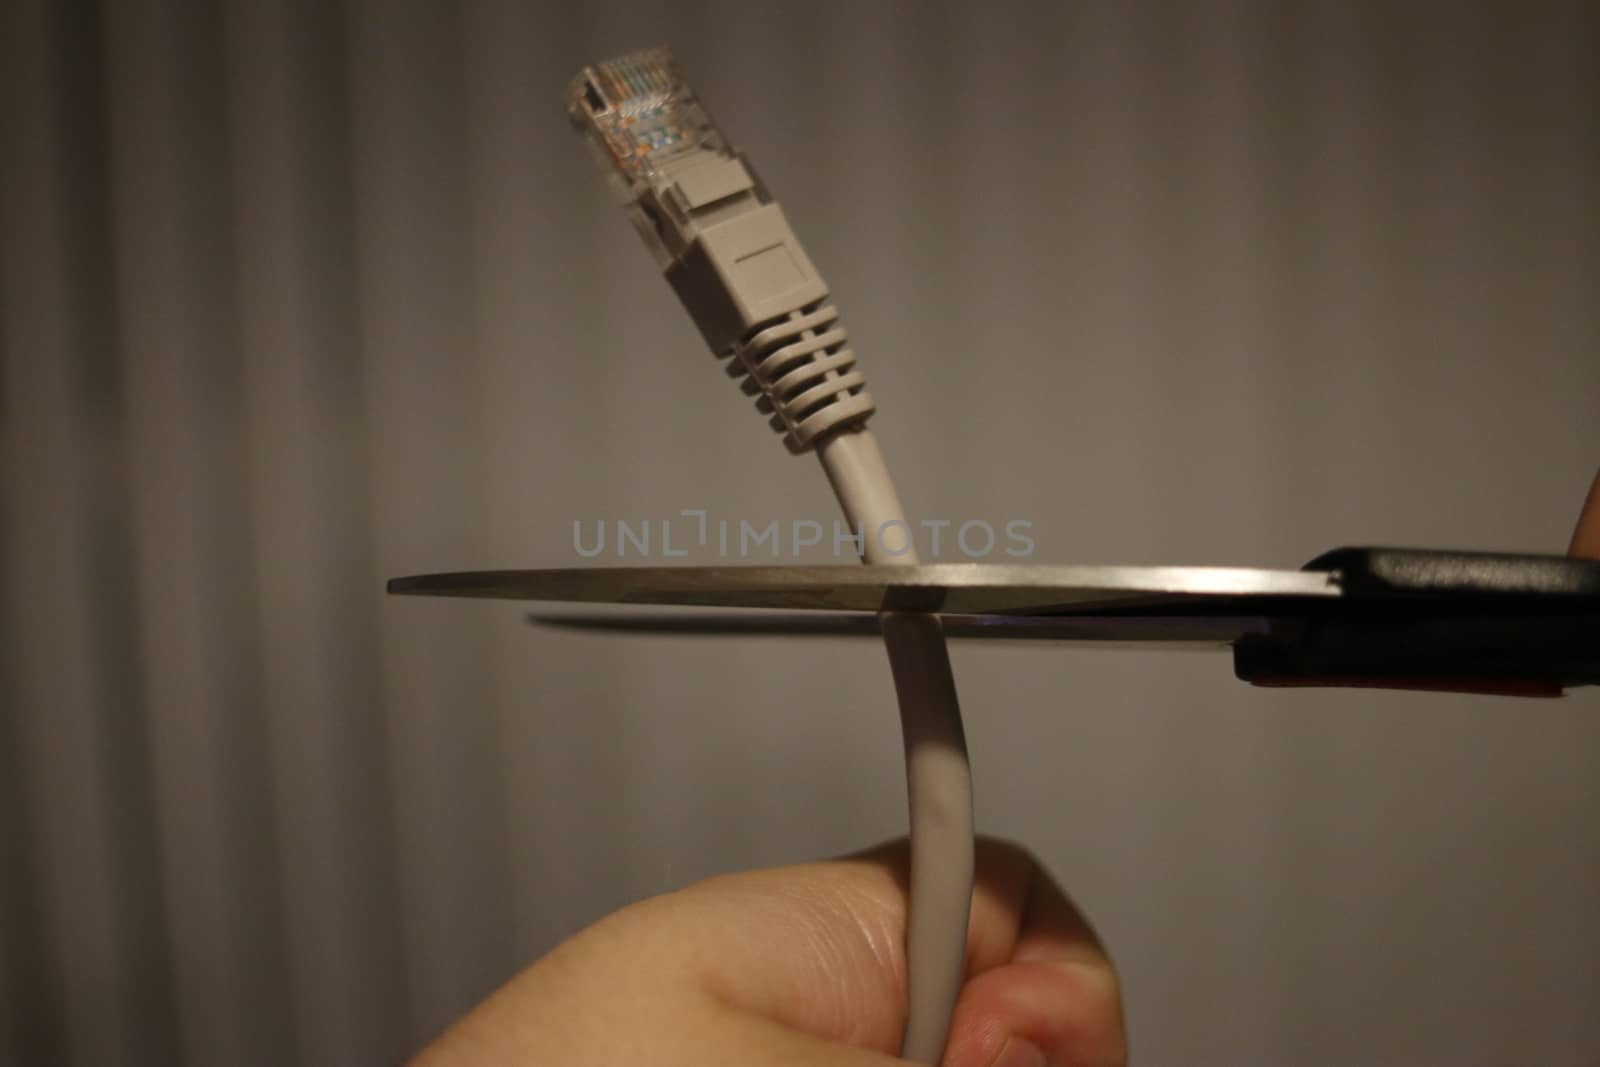 Concept Isolated Photo Of Cutting Cable Cord.